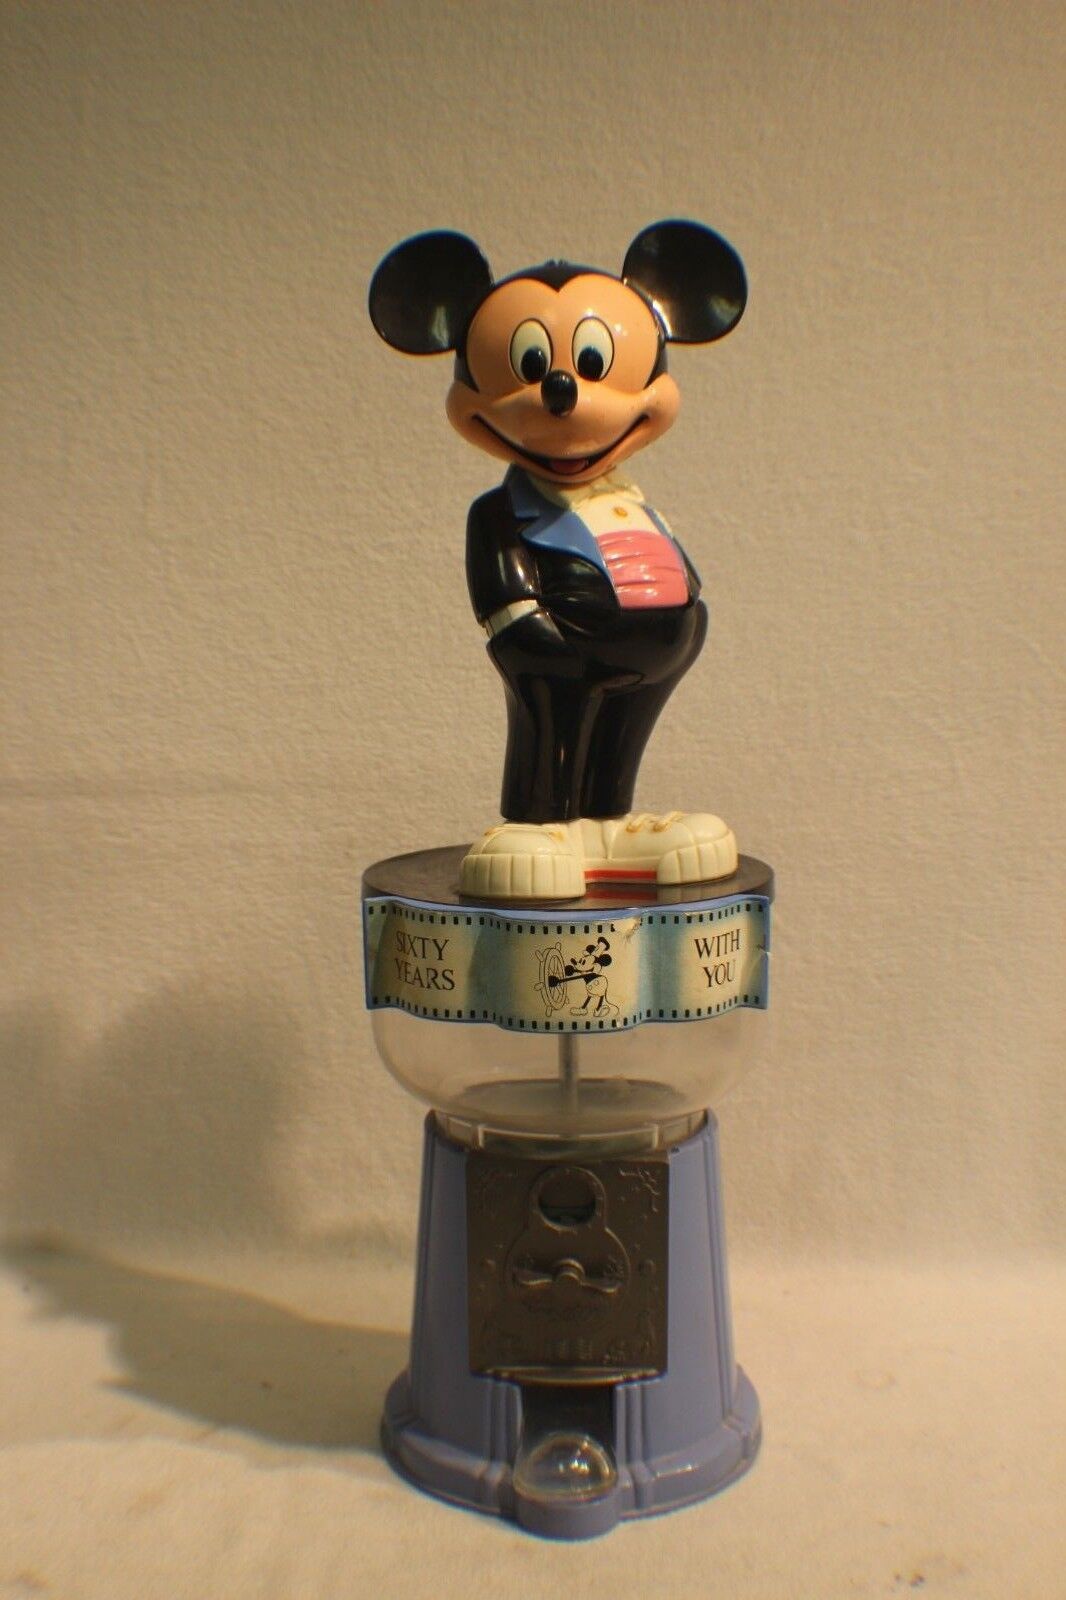 Disney Mickey Mouse 60th Anniversary Gumball Machine (1988) by Superior Toys MFG